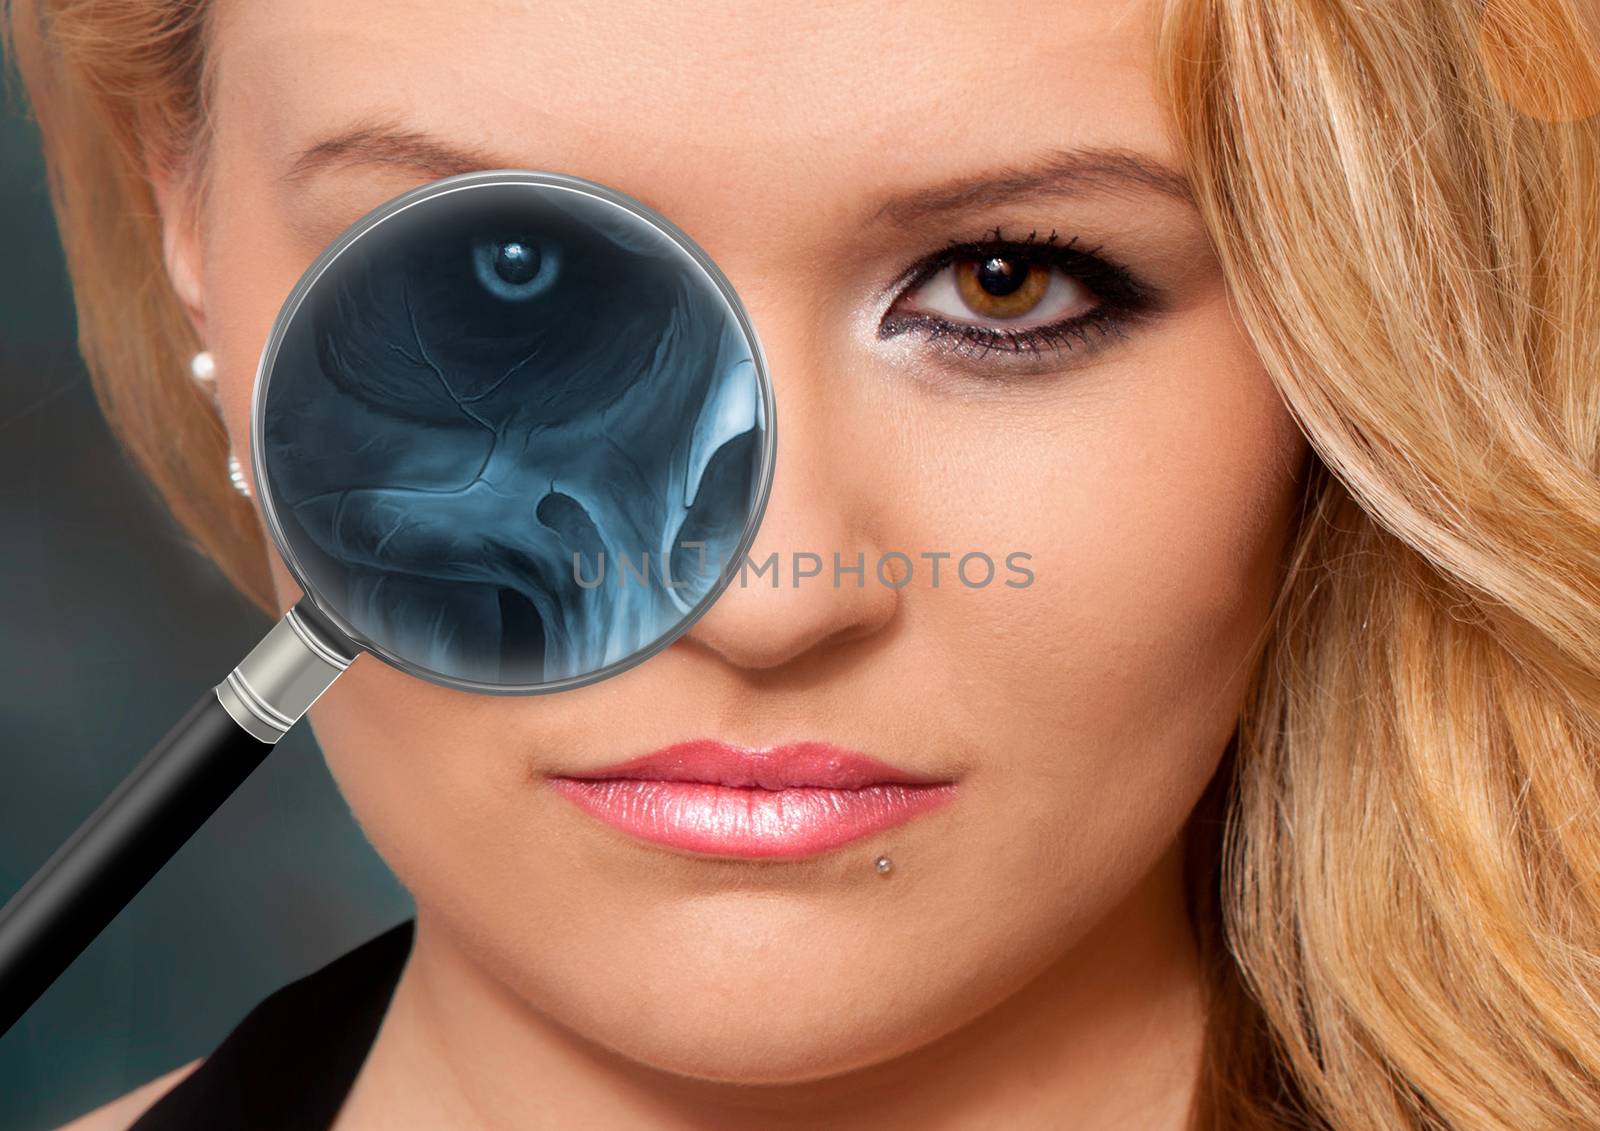 The X-ray with a magnifying glass from the face part of a human, the human eye